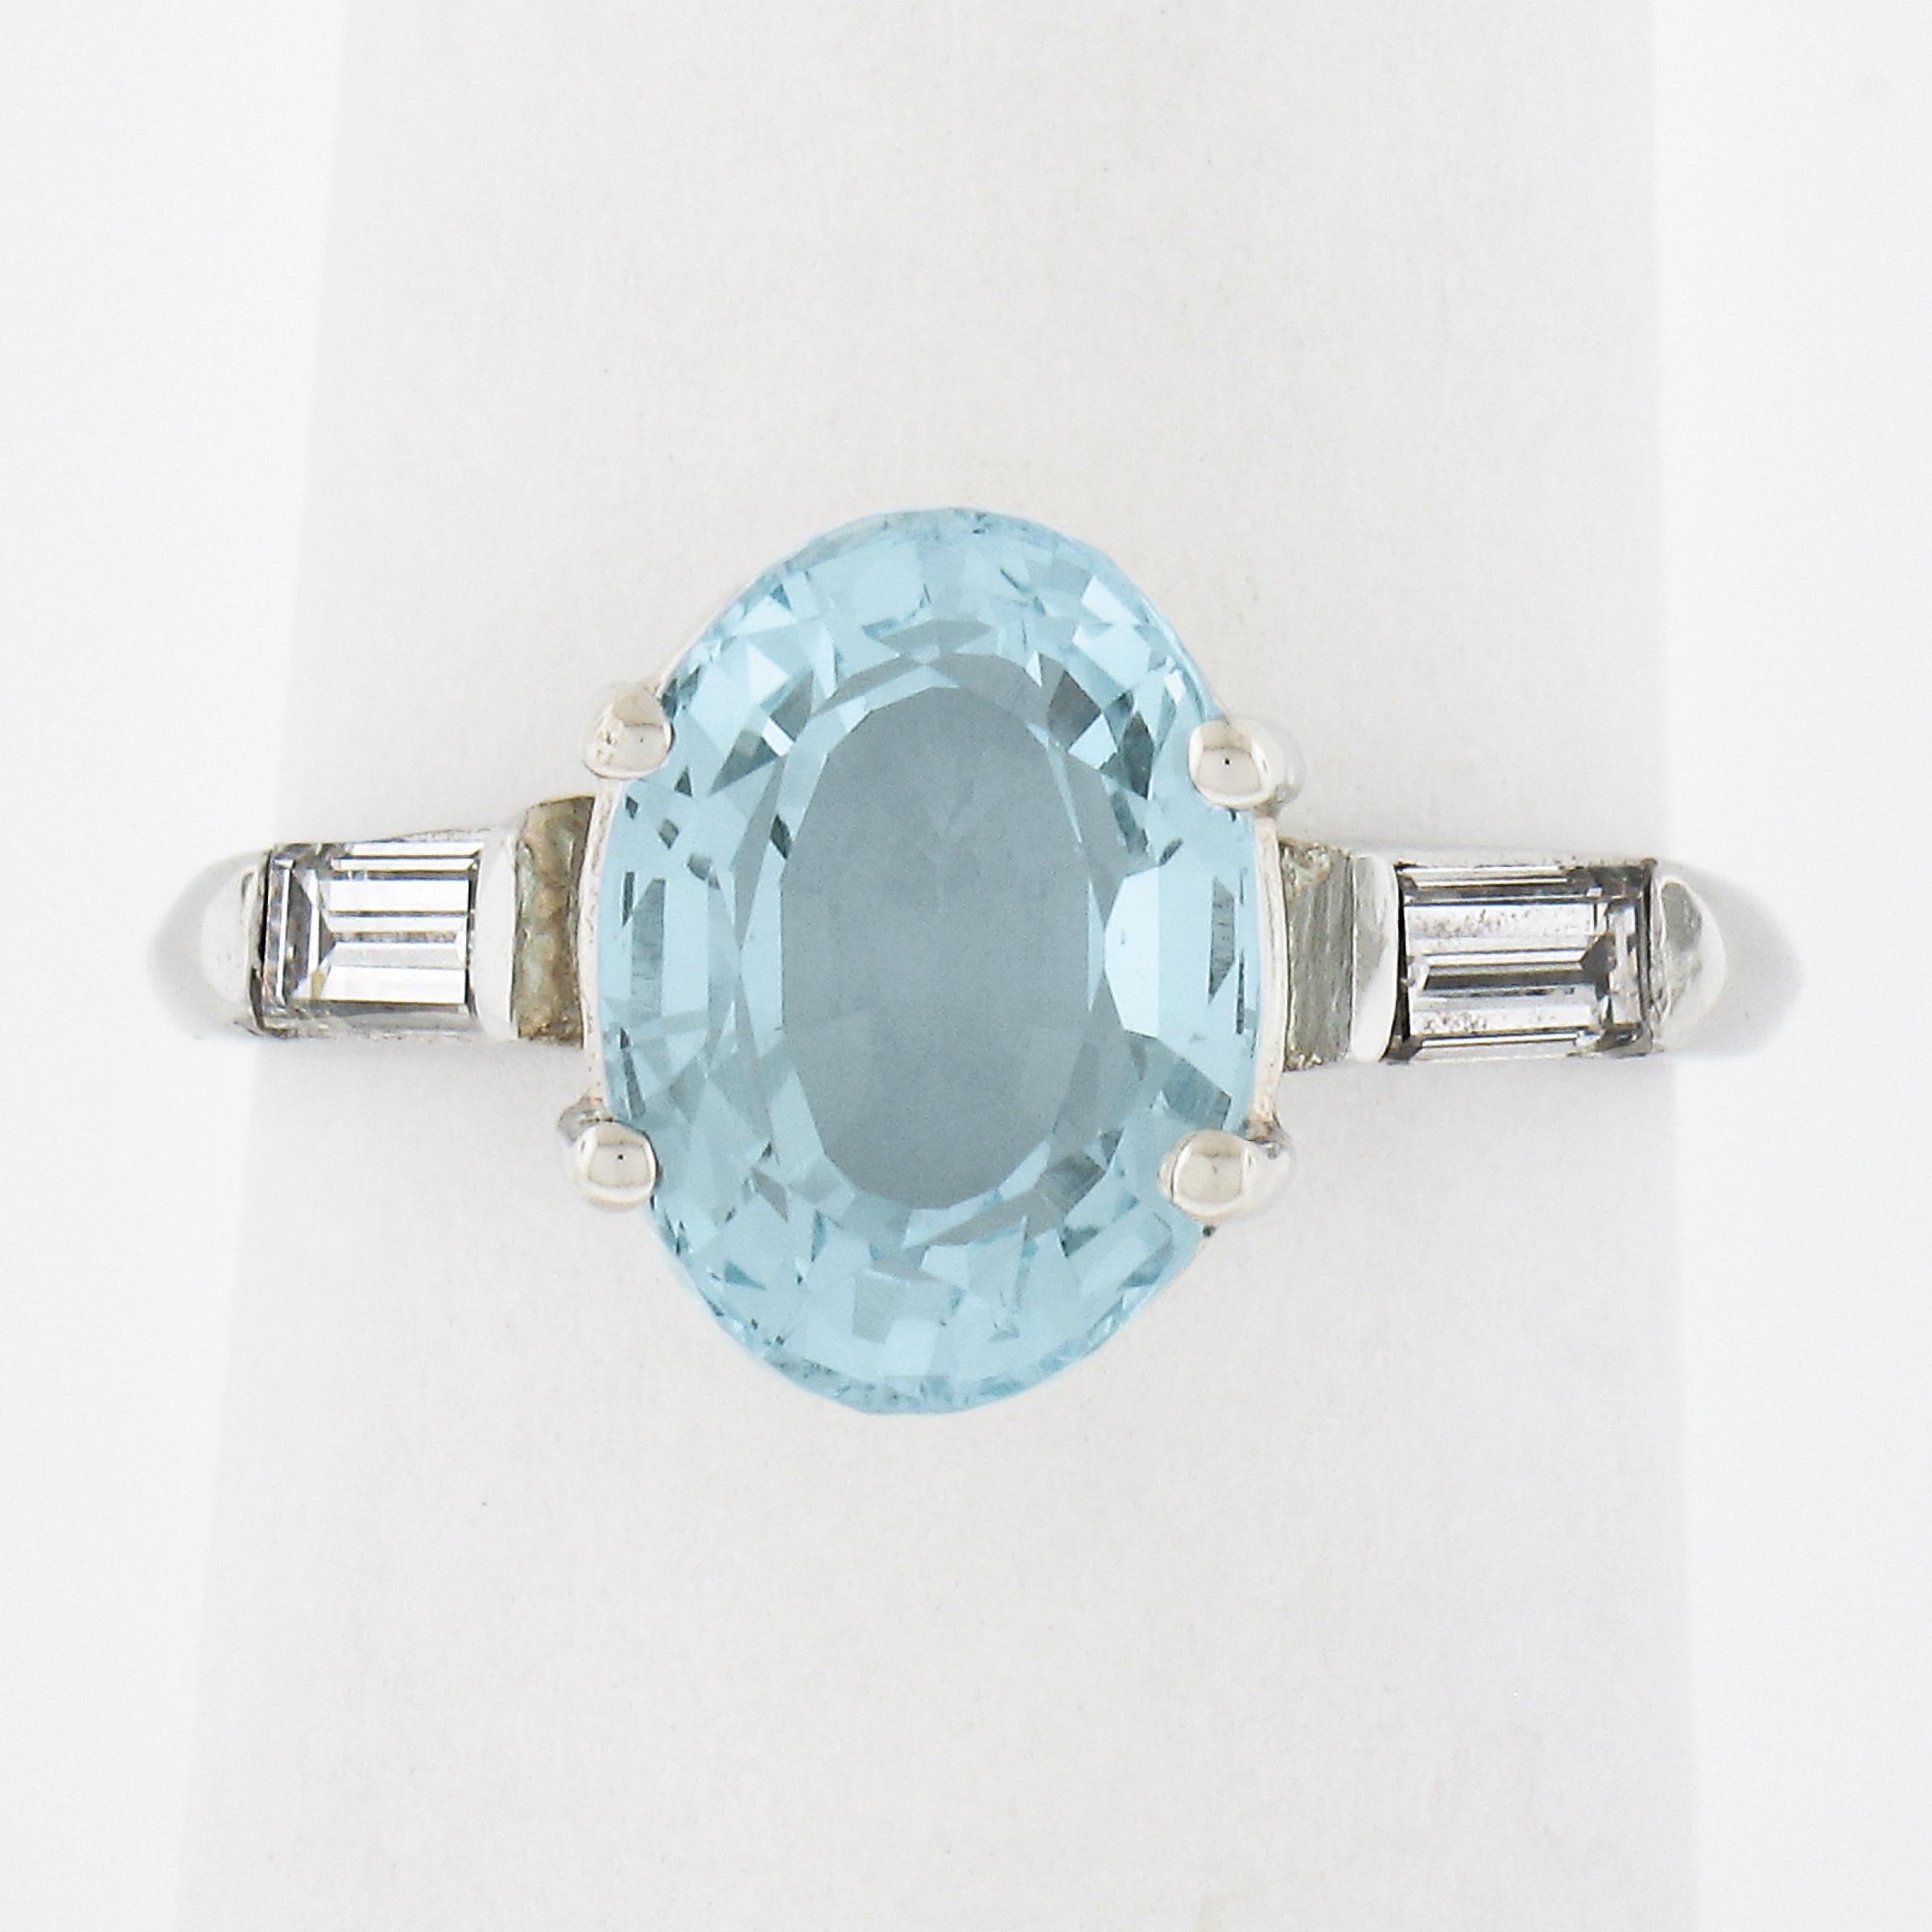 --Stone(s):--
(1) Natural Genuine Aquamarine - Oval Cut - Prong Set - Sky Blue Color - 10.5x7.7mm - 2.65ct (approx.)
(2) Natural Genuine Diamonds - Baguette Cut - Channel Set - F/G Color - VS2/VS2 Clarity - 0.22ctw (approx.)
Total Carat Weight:	2.87